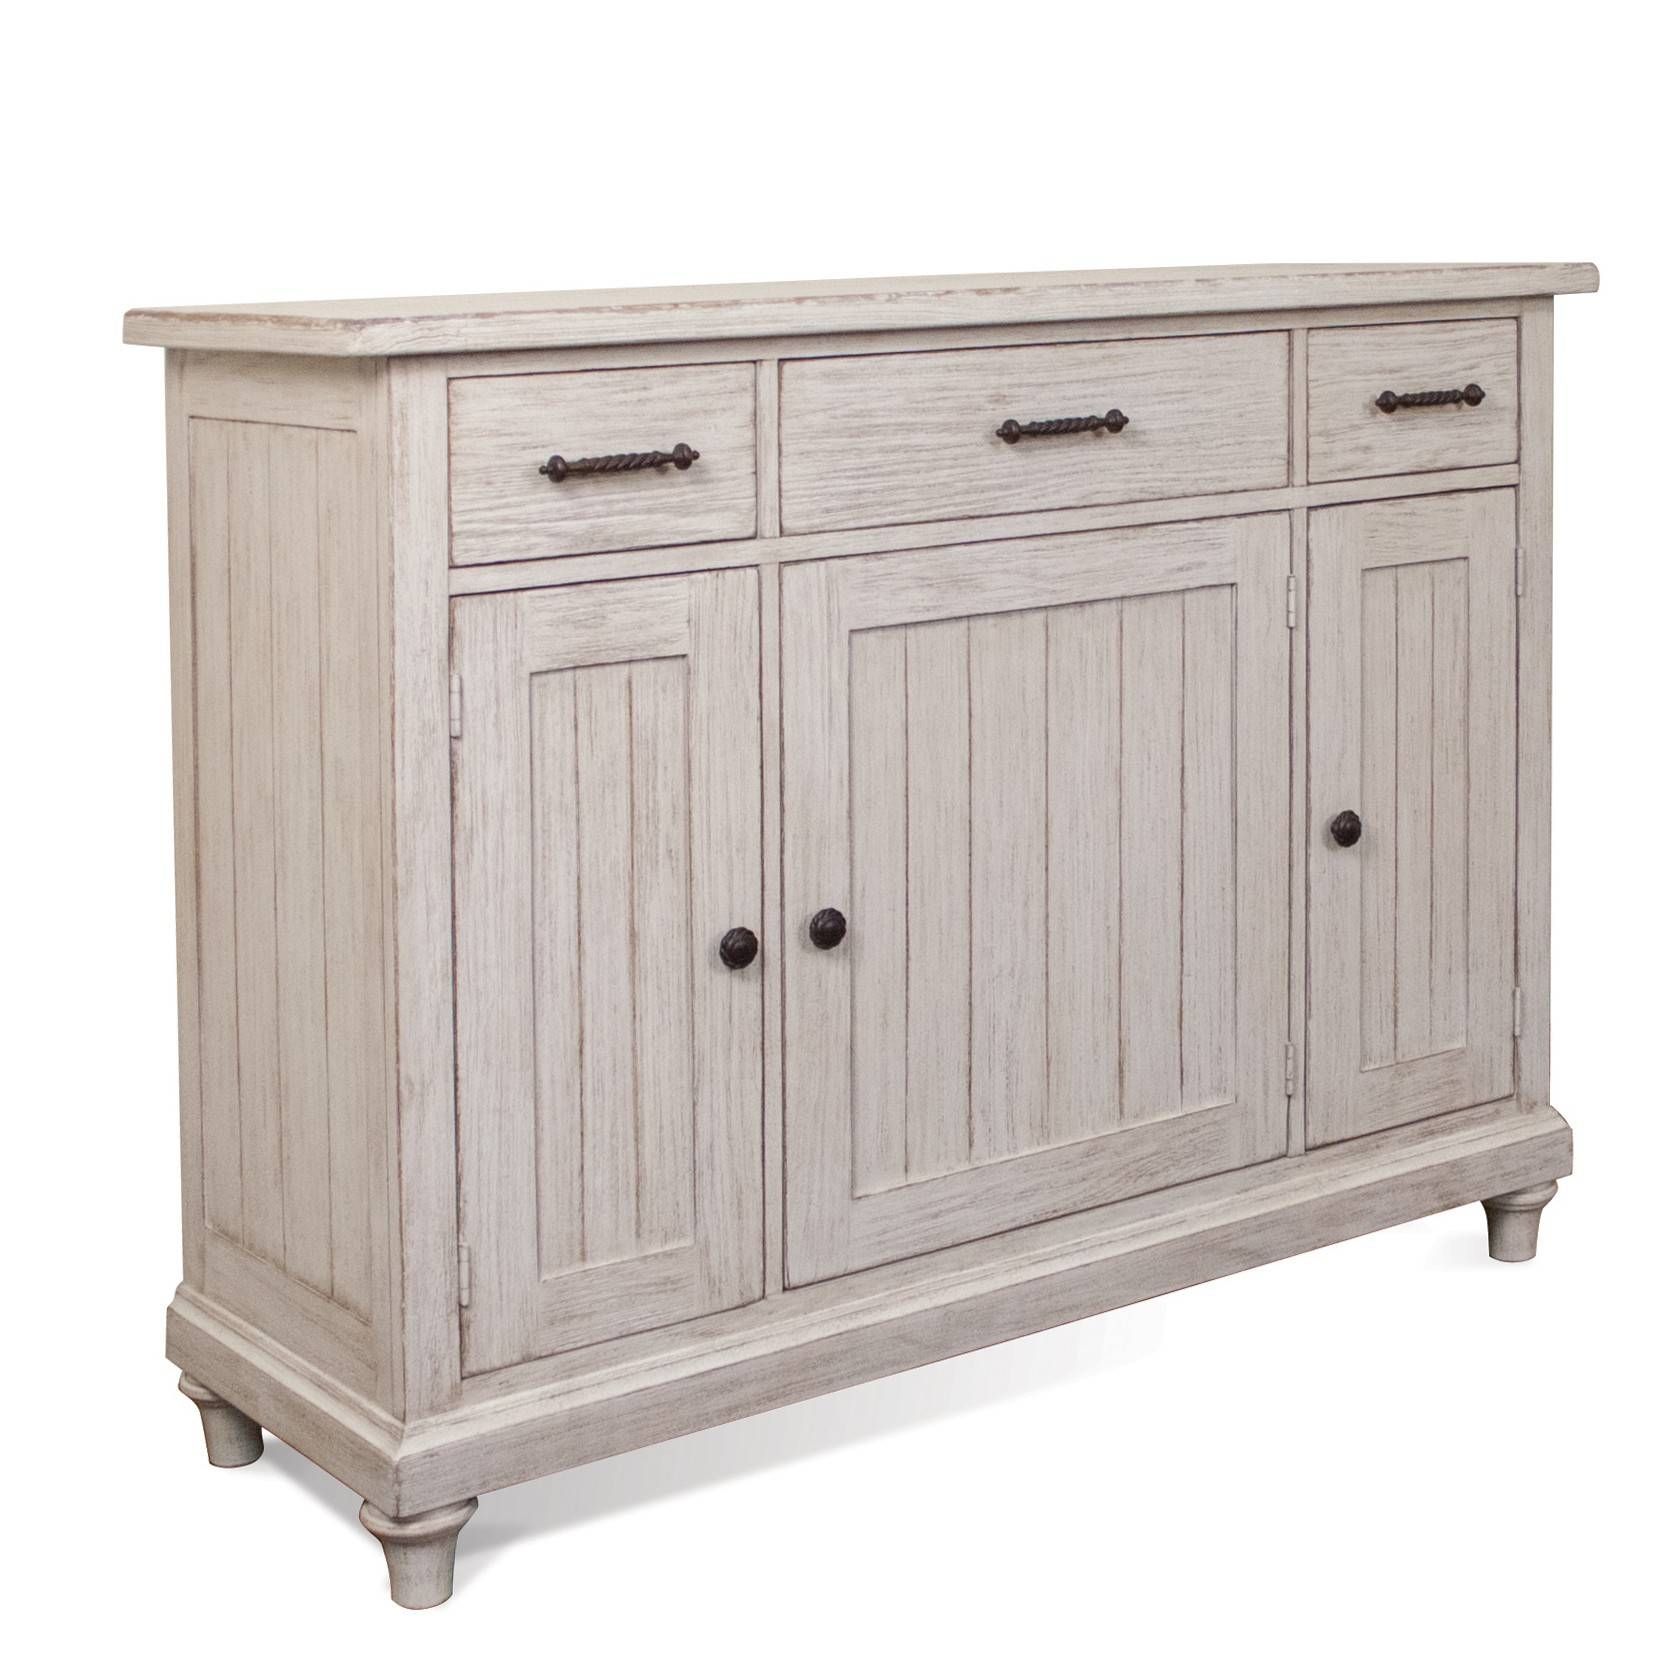 Aberdeen Wood Sideboard Server In Weathered Worn White | Humble Abode Inside White Sideboard Furniture (Photo 8 of 15)